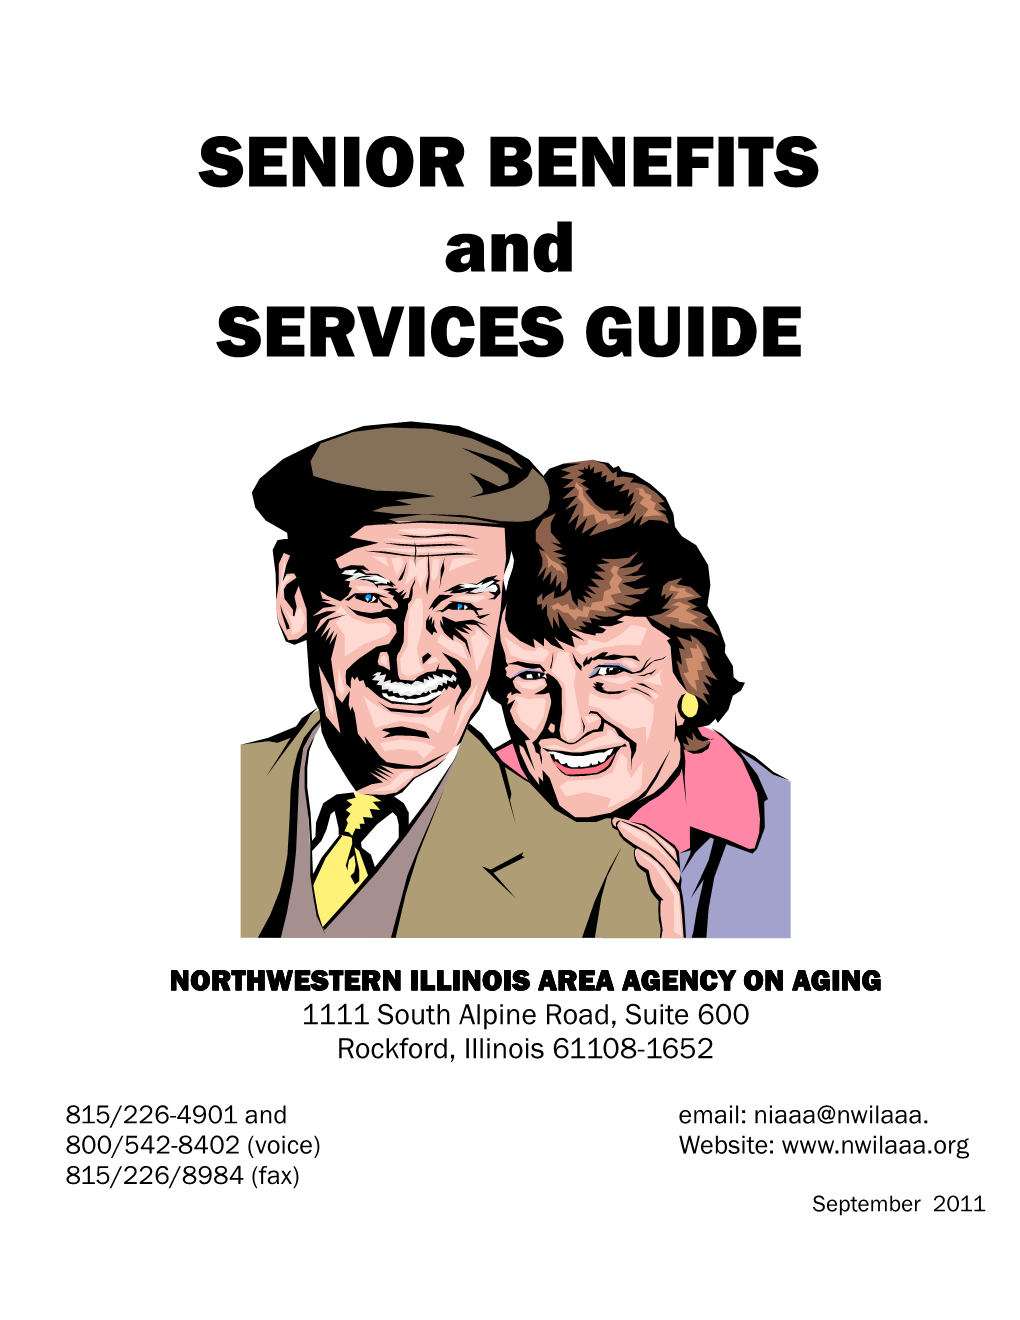 SENIOR BENEFITS and SERVICES GUIDE